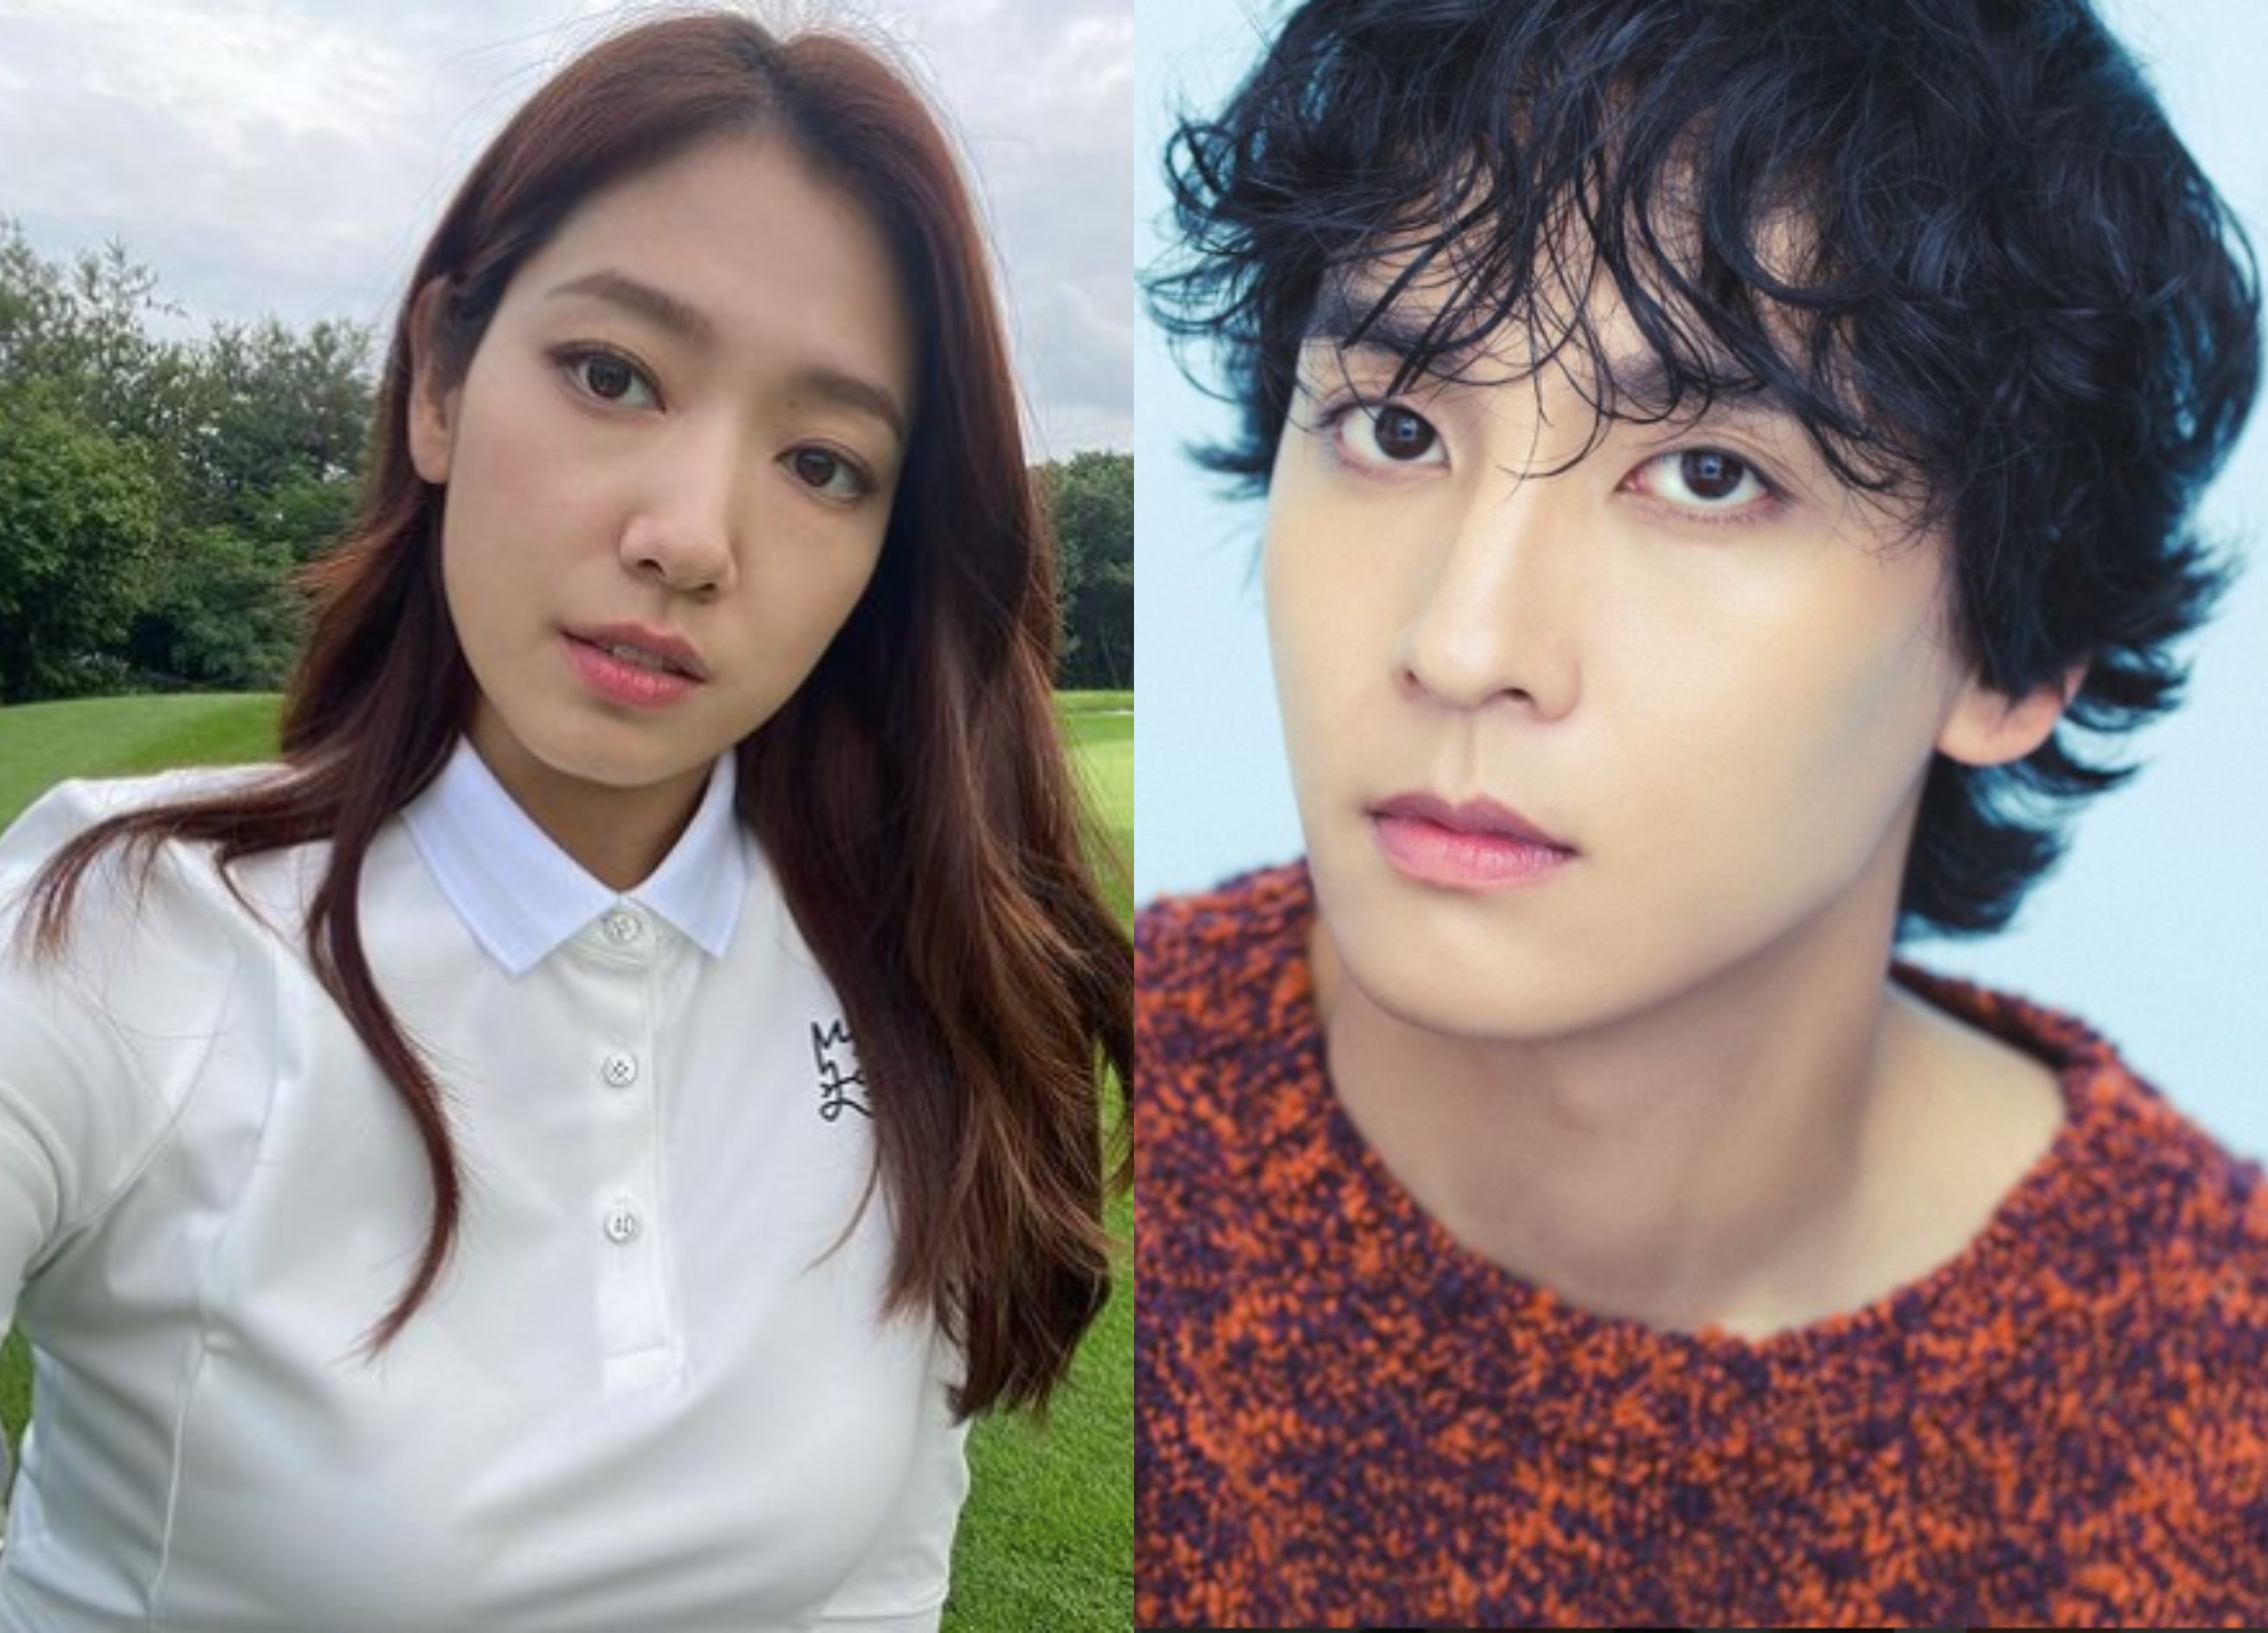 Park Shin-hye and Choi Tae-joon are engaged and expecting a baby